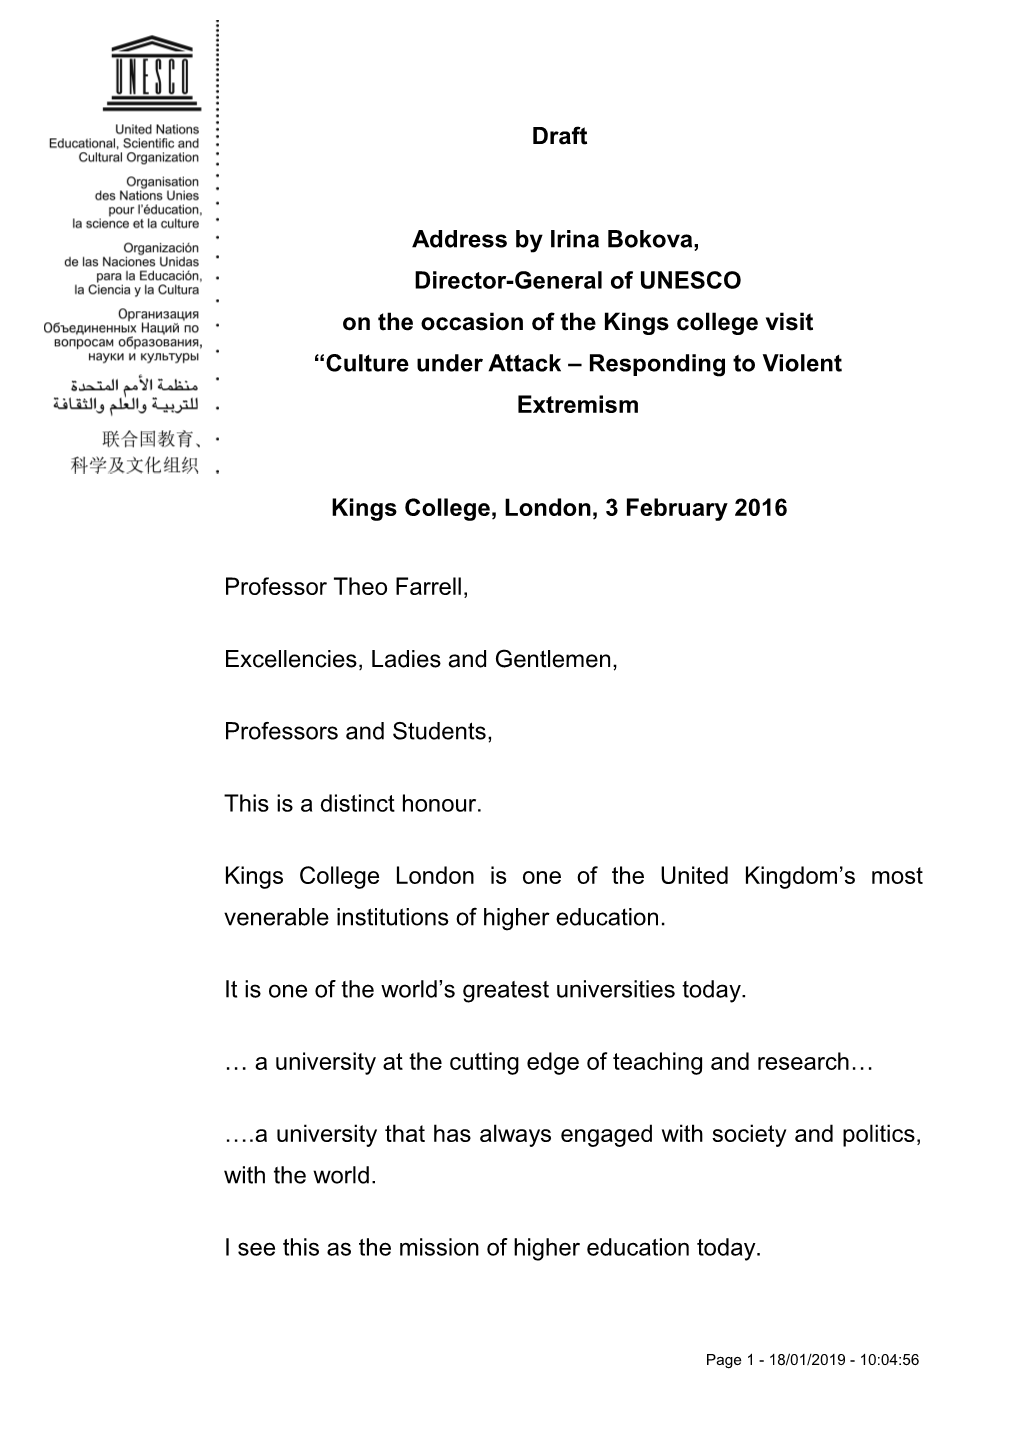 Address by Irina Bokova, Director-General of Unescoon the Occasion of the Kings College